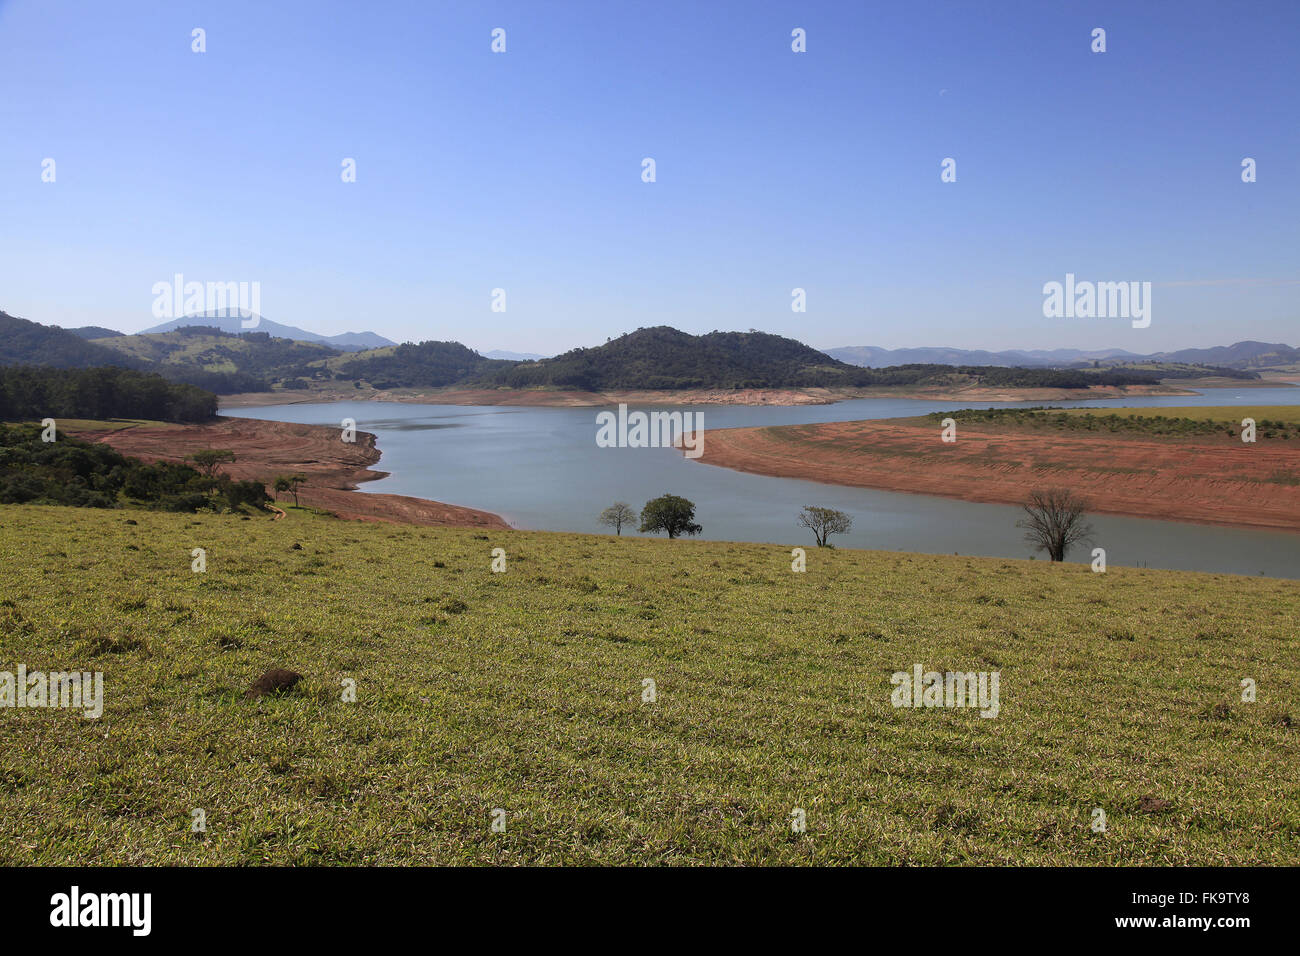 Dam formed by Jaguari Jacarei and rivers in the period of severe drought Stock Photo